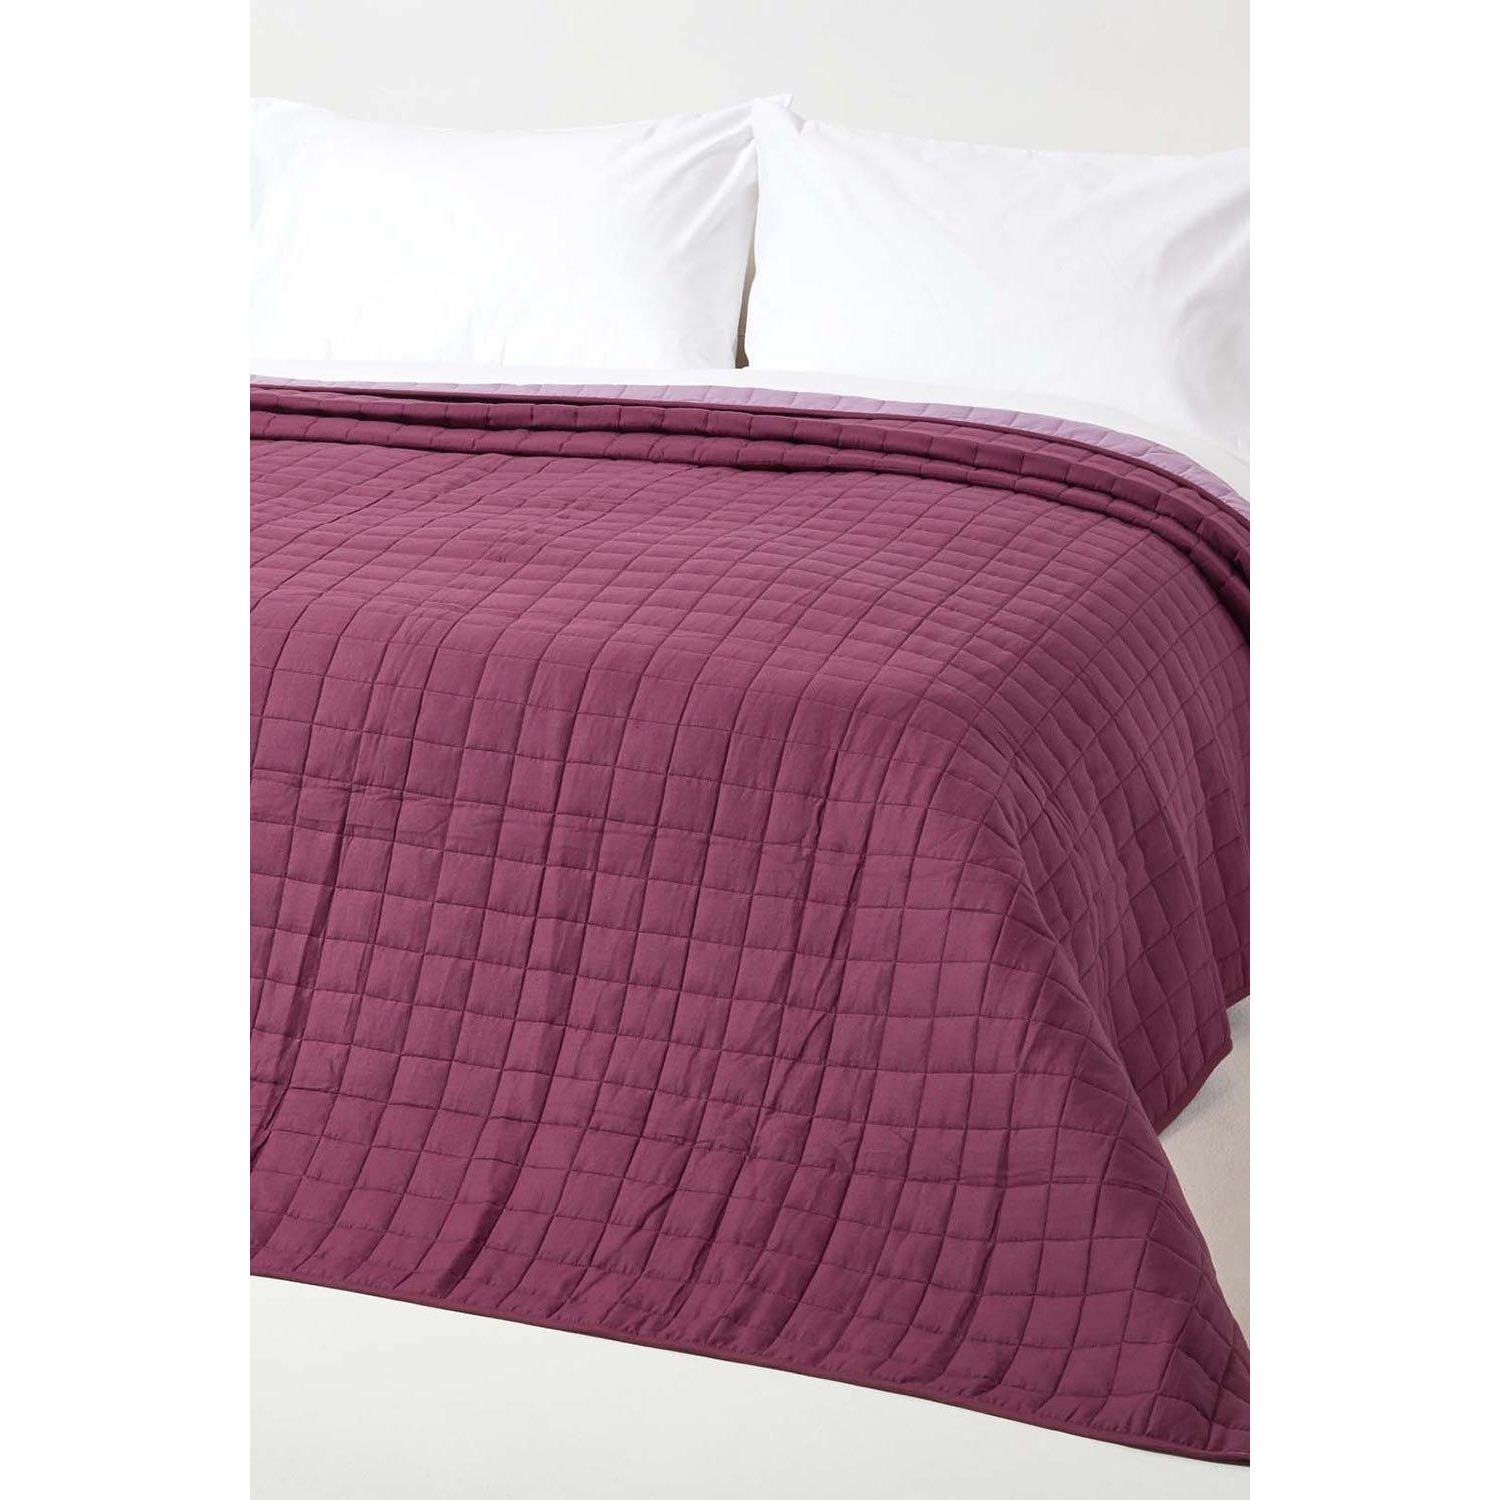 Cotton Quilted Reversible Bedspread - image 1